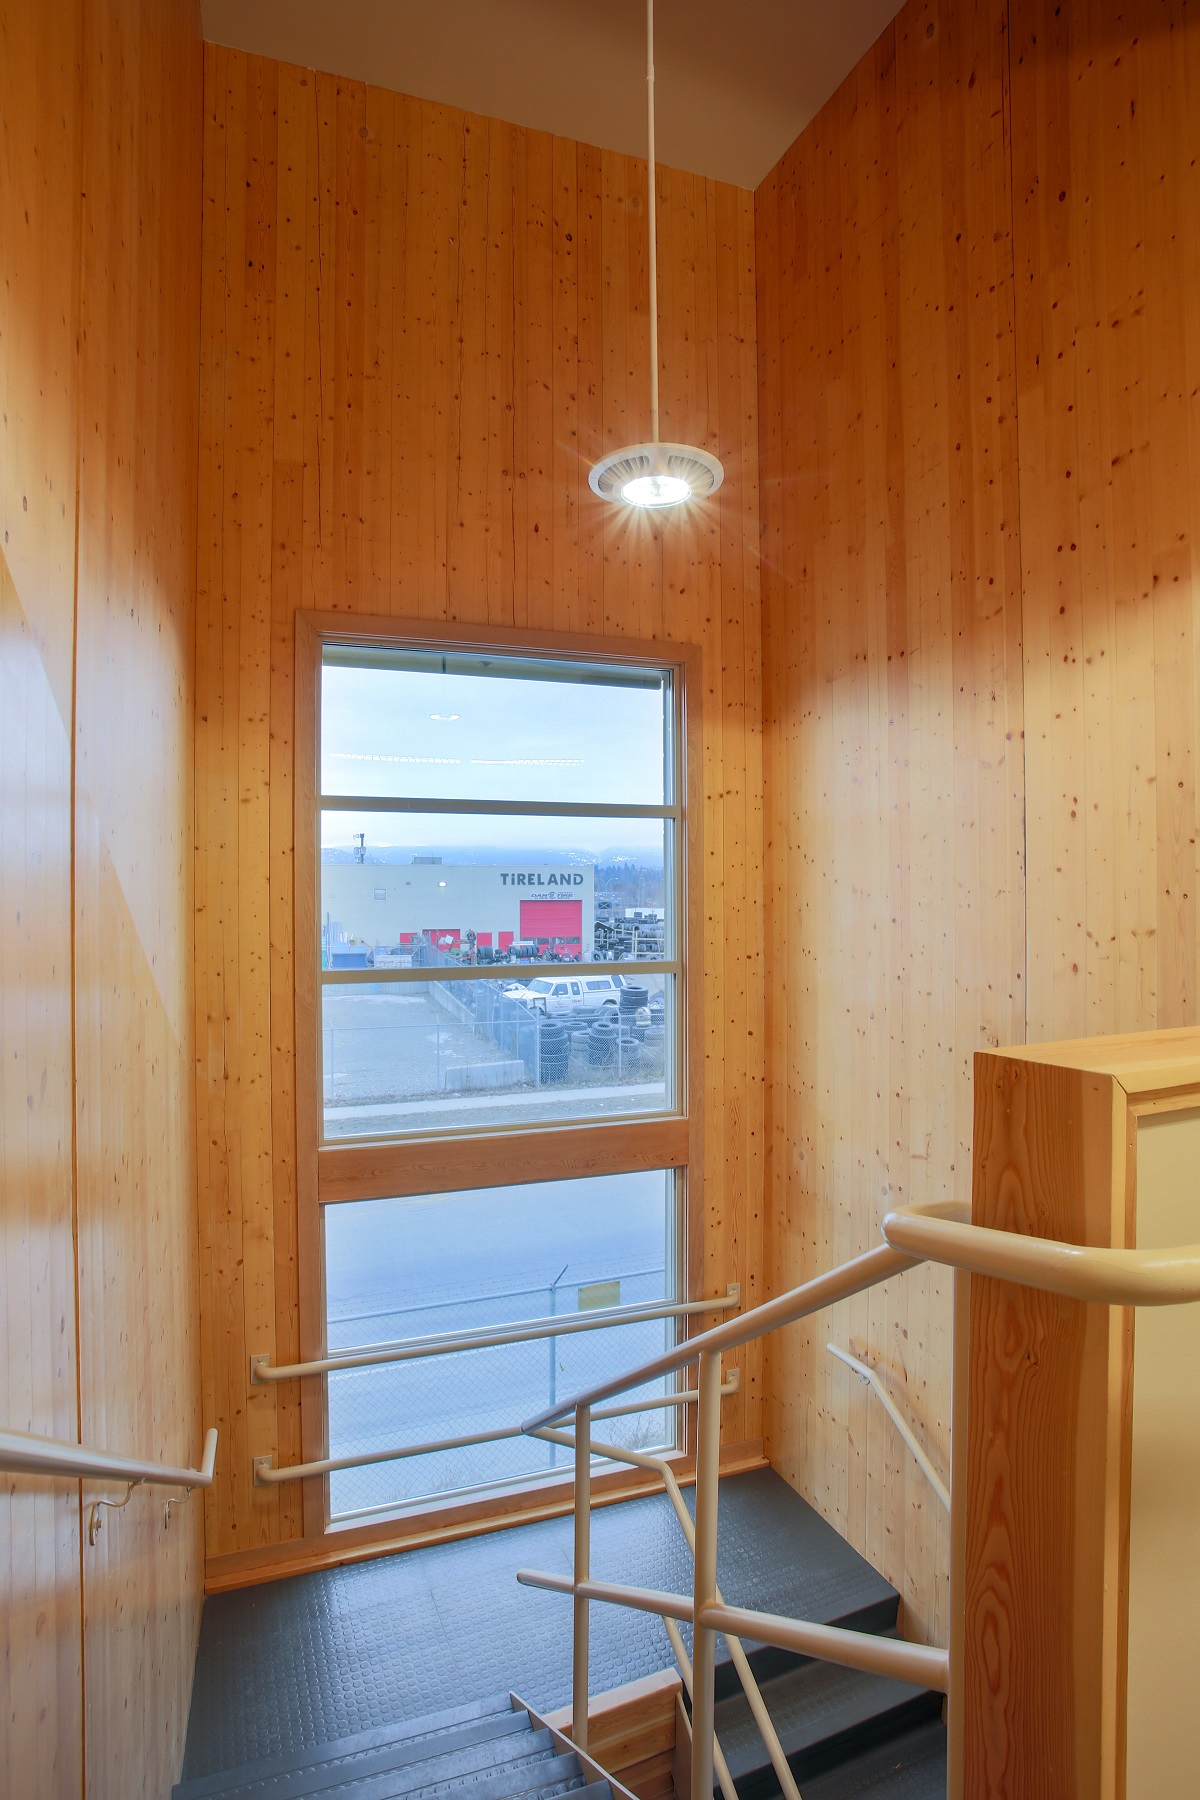 cross-laminated timber (CLT) wall panelling is showing is this brightly lit daytime top down image of the Van-Kam Freightways stairwell with large window and metal handrail